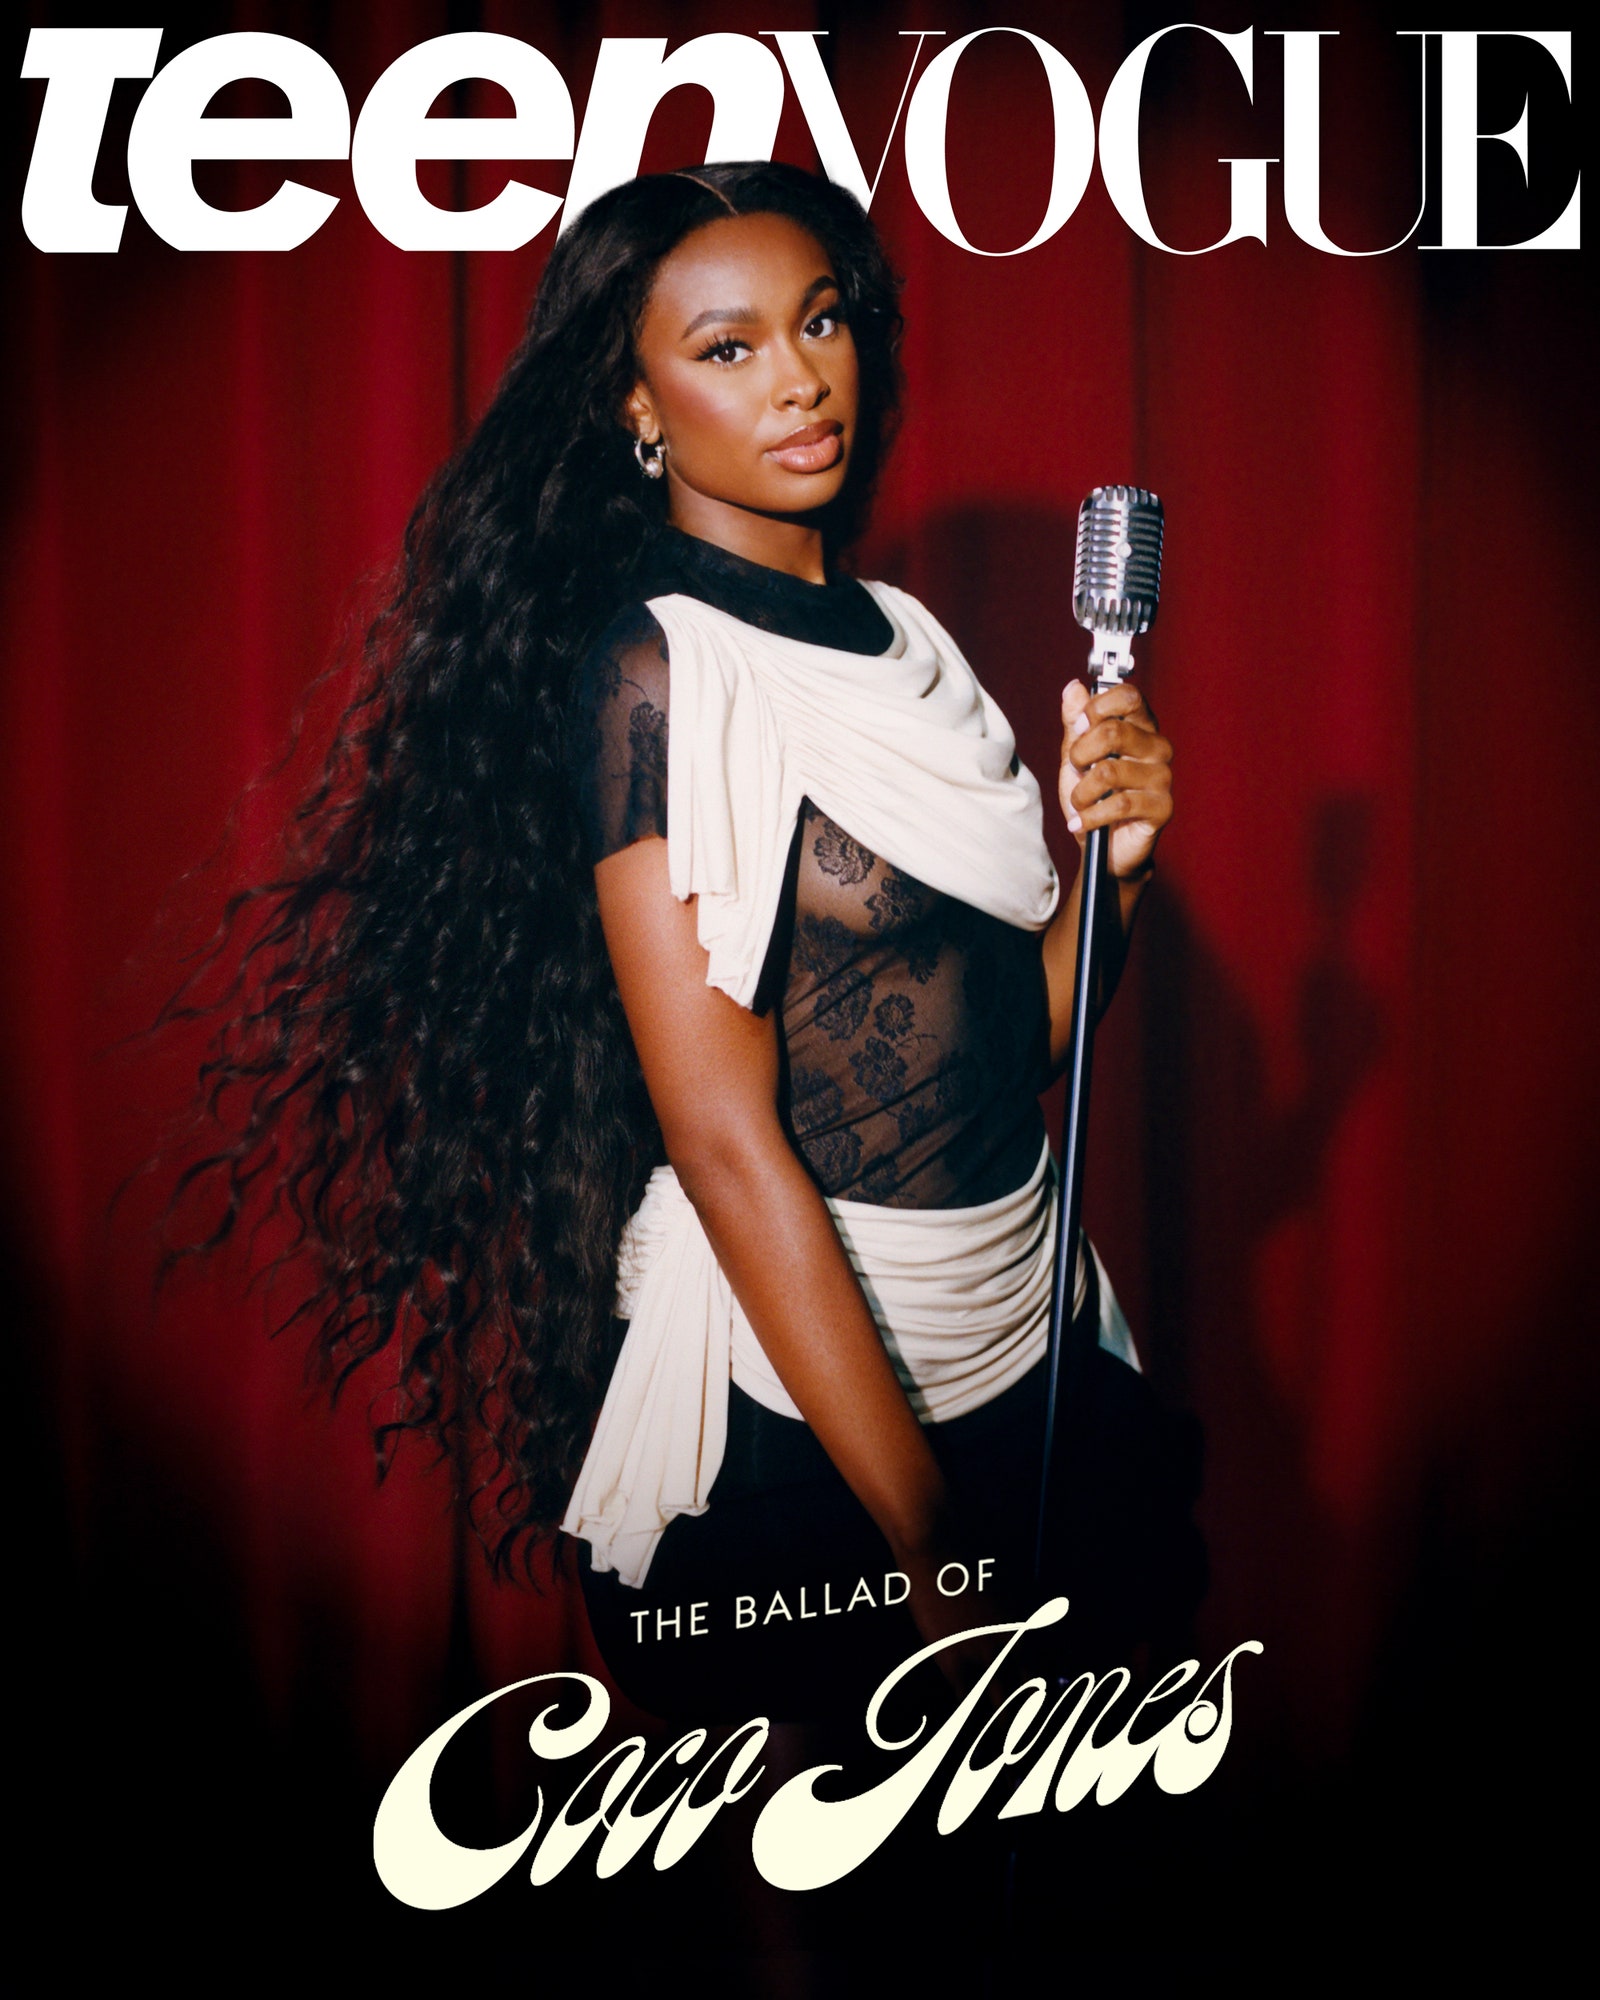 Coco Jones wearing black and white holding a microphone in front of a red theater curtain